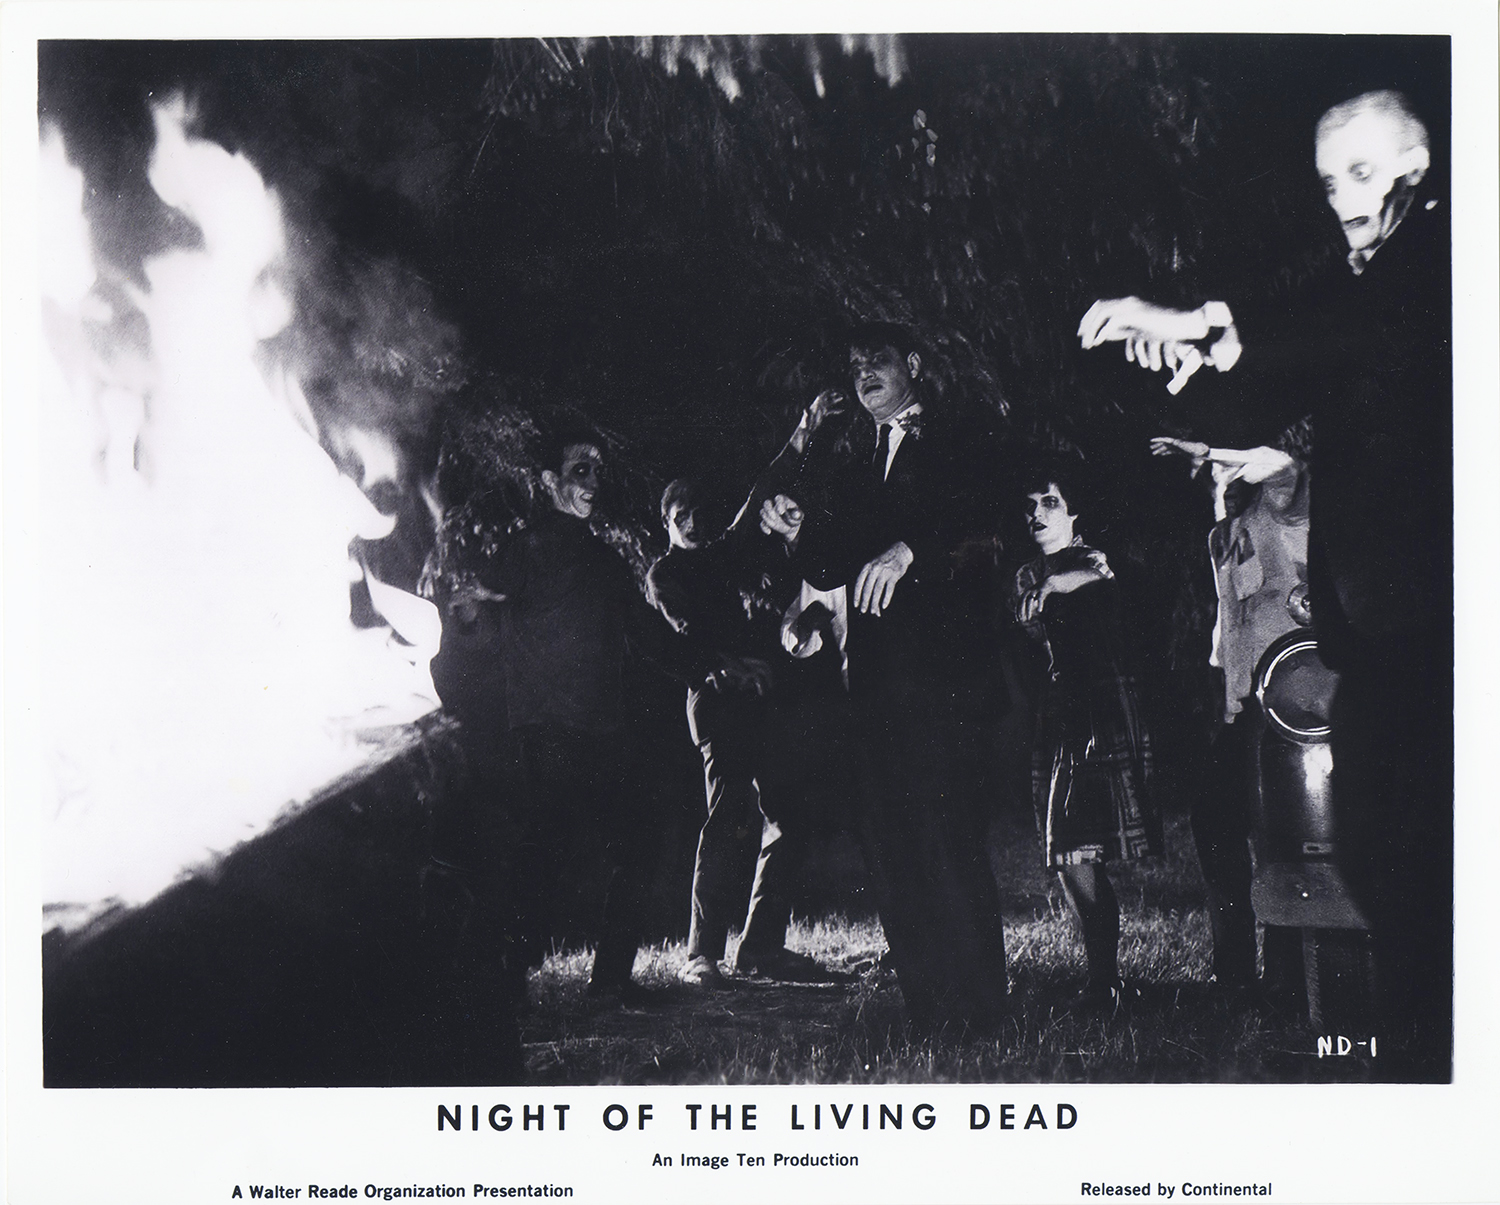 Still from George Romero's Night of the Living Dead. From the Leland Hartman Papers and Photographs, MSS 896, Detre Library & Archives at the History Center.